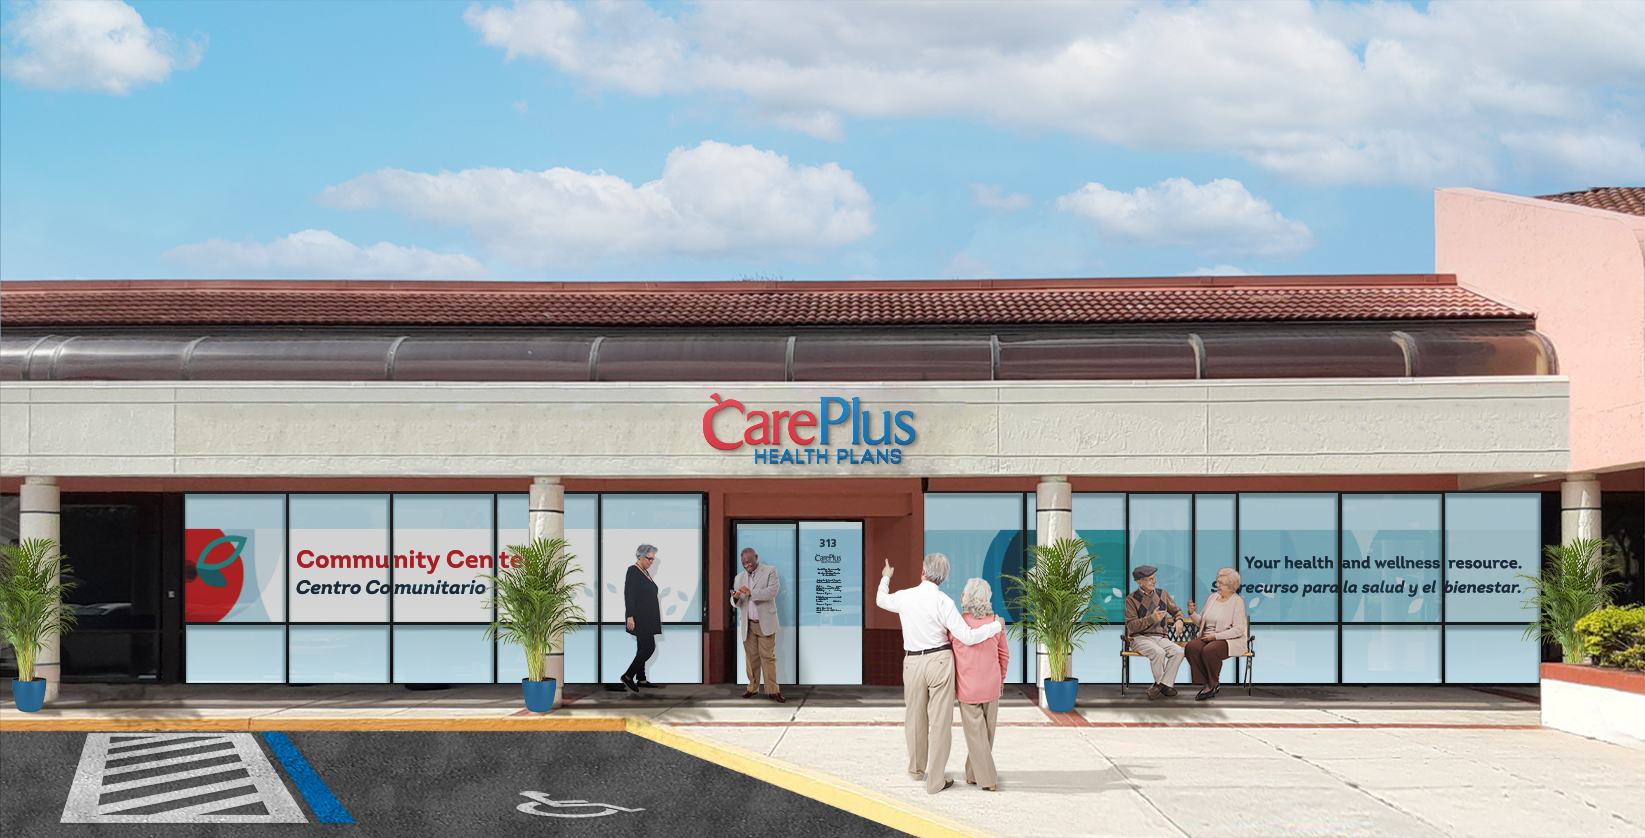 The CarePlus Community Center in Winter Haven, Florida is free and open to the public.